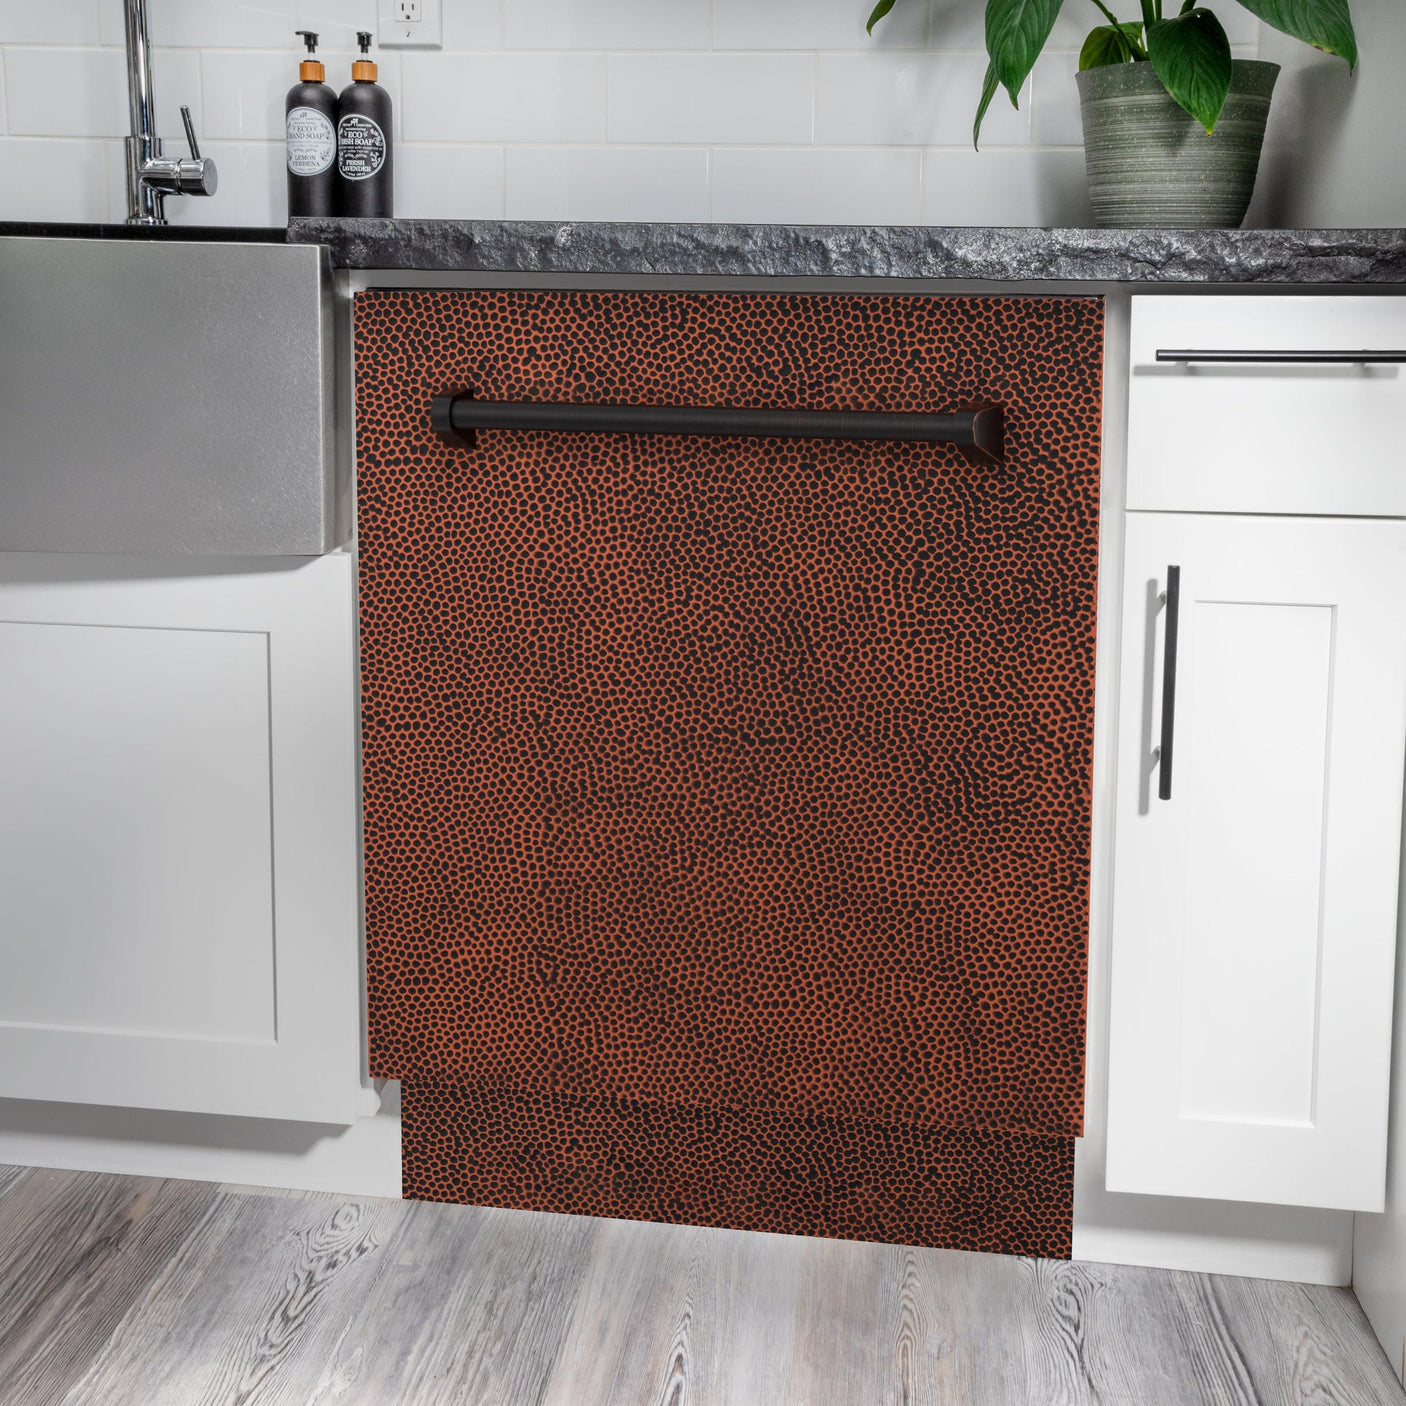 ZLINE 24" Tallac Series 3rd Rack Dishwasher with Traditional Handle, 51dBa (DWV-24) [Color: Hand Hammered Copper]